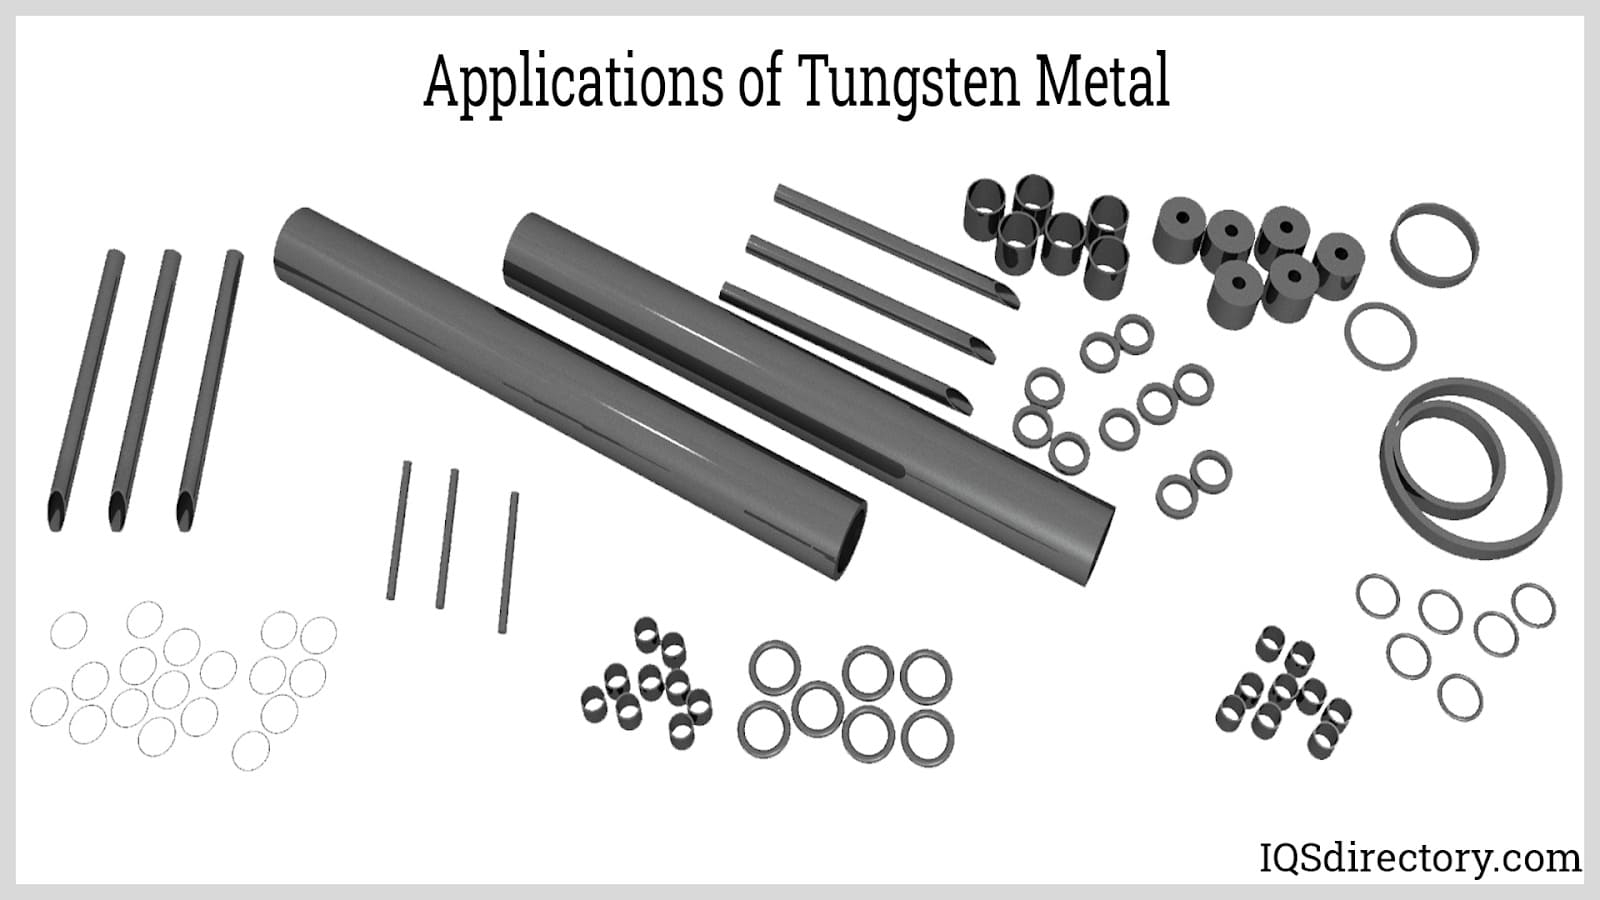 Applications of Tungsten Metal